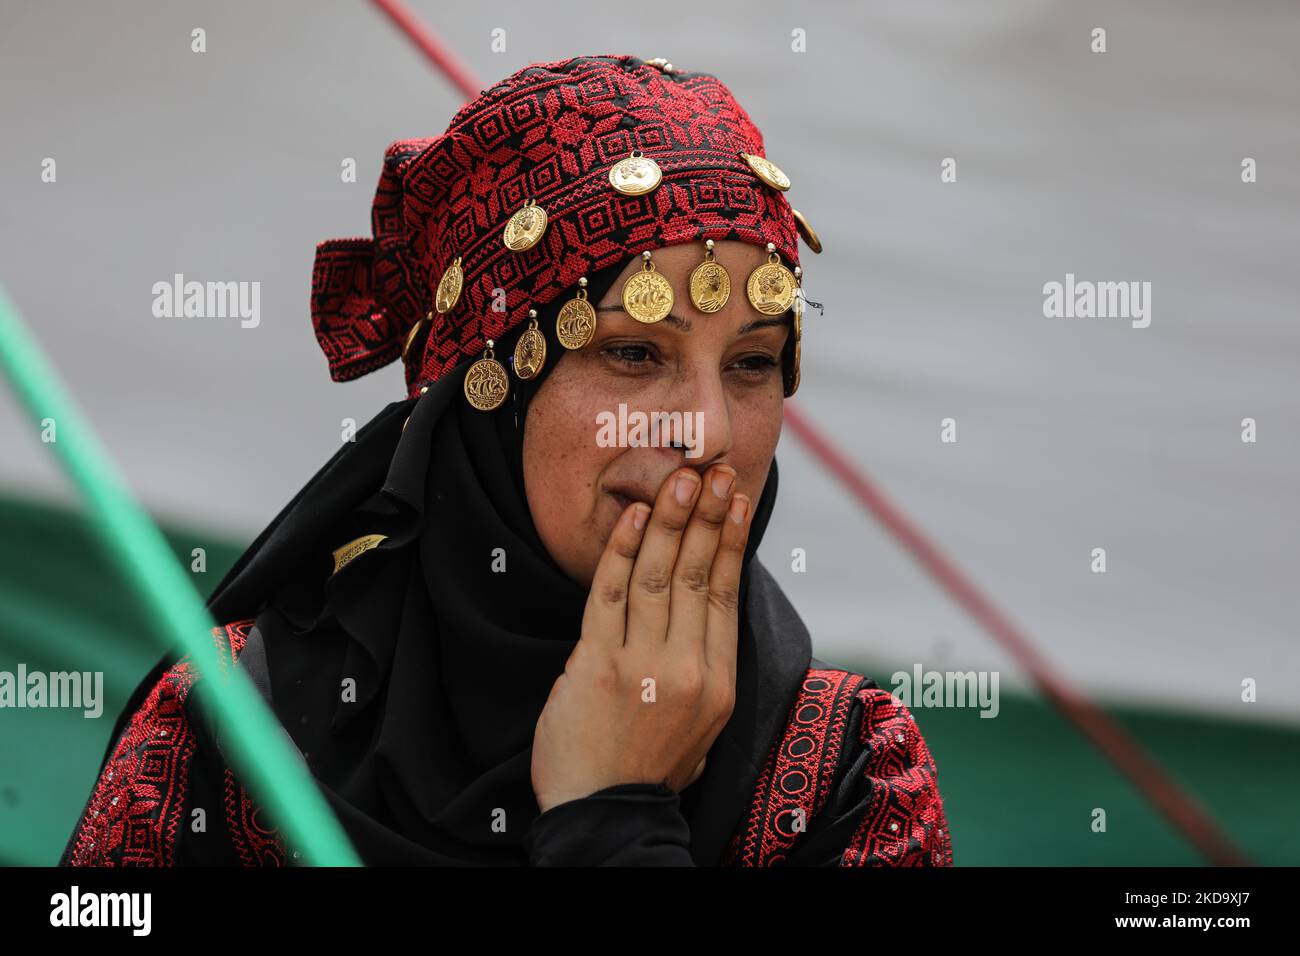 A Palestinian woman during a demonstration ahead of the 74th anniversary of the Nakba, the "catastrophe" of Israel's creation in 1948.in Gaza City, on May 14, 2022. - Palestinians and Arab Israelis commemorate the Nakba on May 15 -- the official date of Israel's creation according to the western calendar. Hundreds of thousands of Palestinians fled their homes or were forced out of them on the creation of Israel in 1948. Those who stayed in their villages when Israel was created are now described as Israeli Arabs, but the majority became refugees in the West Bank, Gaza Strip and neighbouring Ar Stock Photo